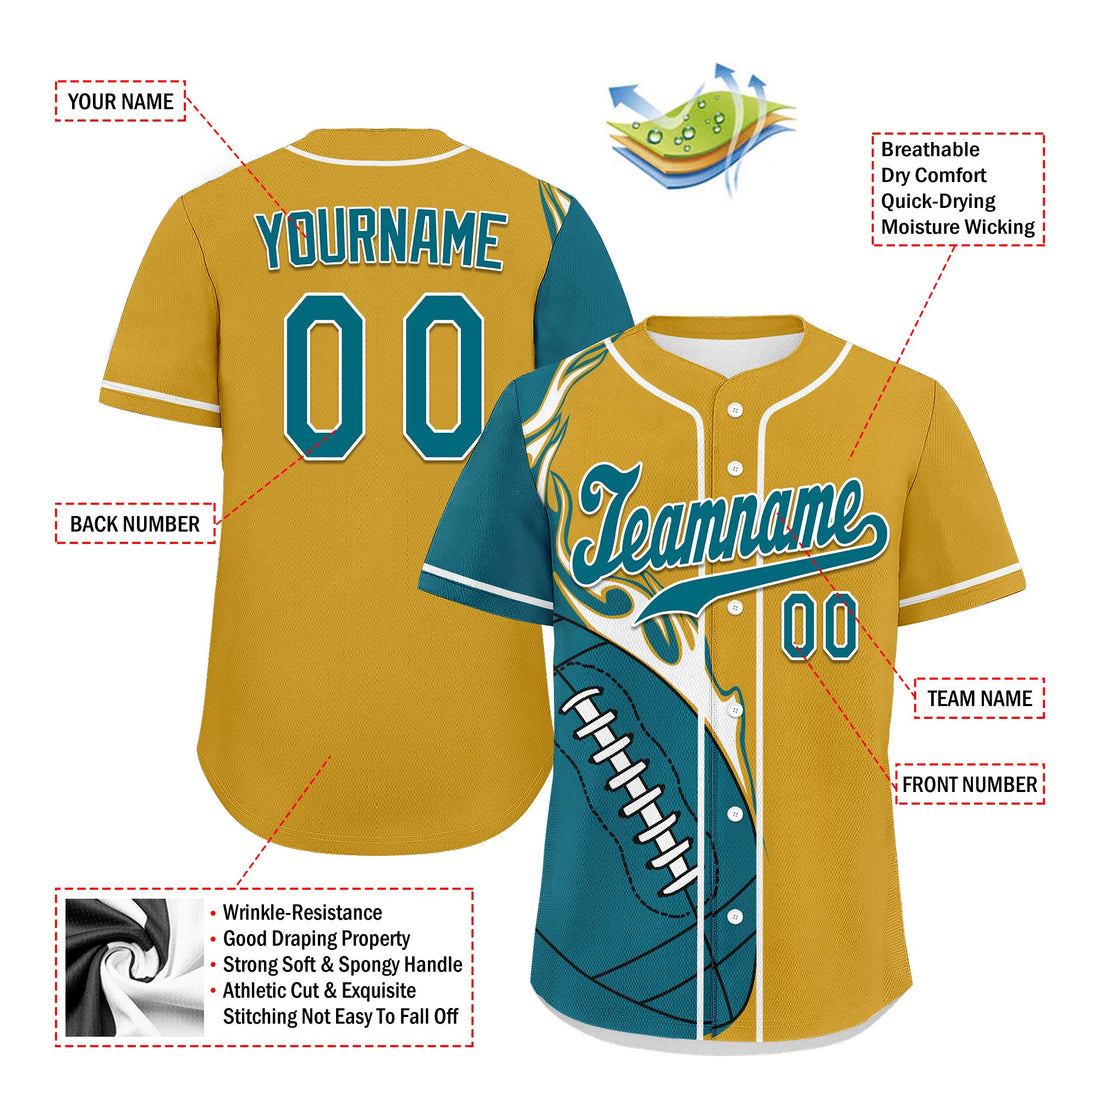 Custom Yellow Cyan Classic Style Personalized Authentic Baseball Jersey UN002-D0b0a00-af